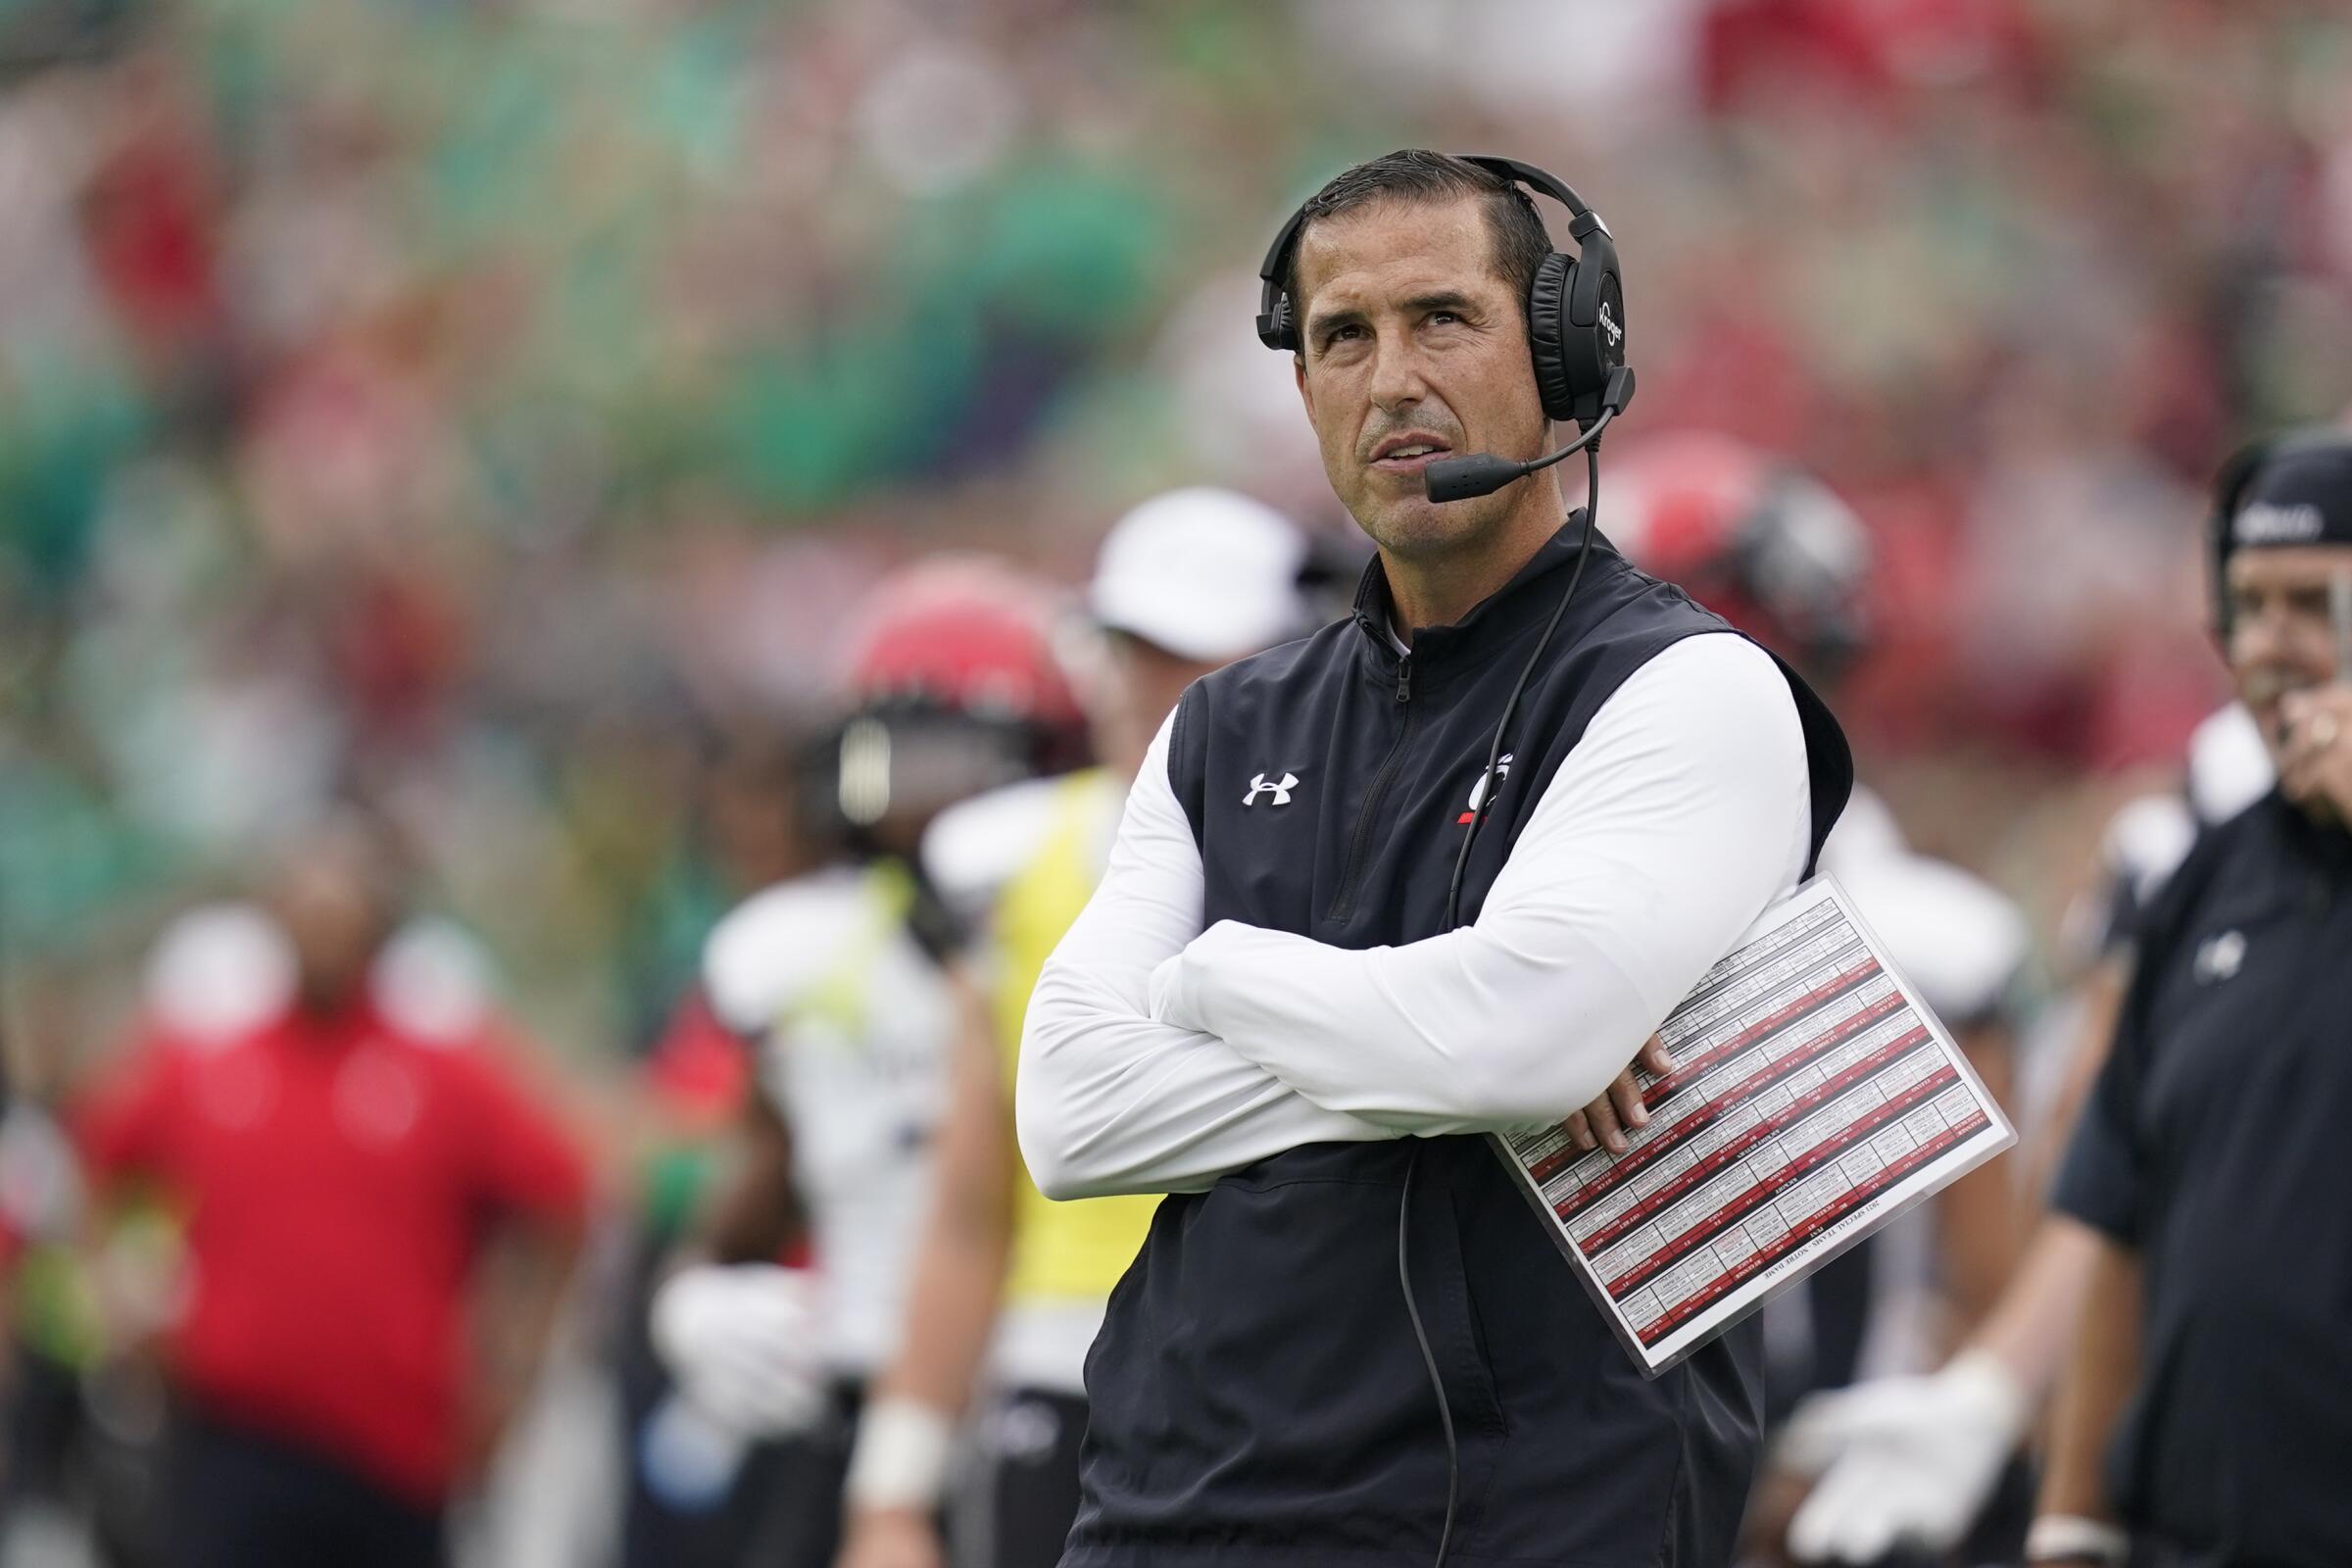 Cincinnati coach Luke Fickell watches a replay during the first half.